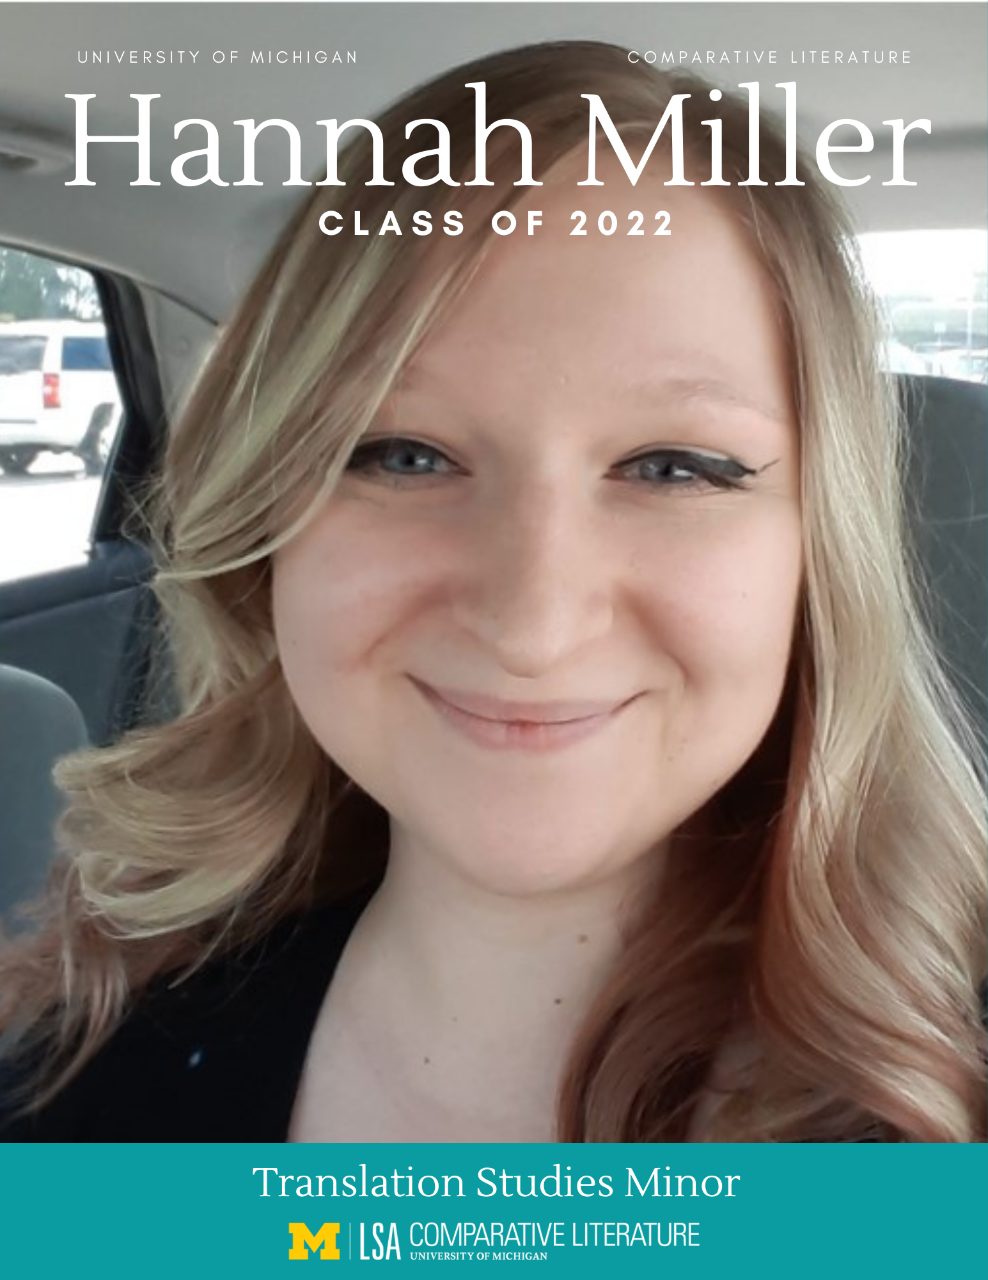 Headshot of Hannah Miller with text, “University of Michigan, Comparative Literature, Hannah Miller Class of 2022. Translation Studies Minor.”